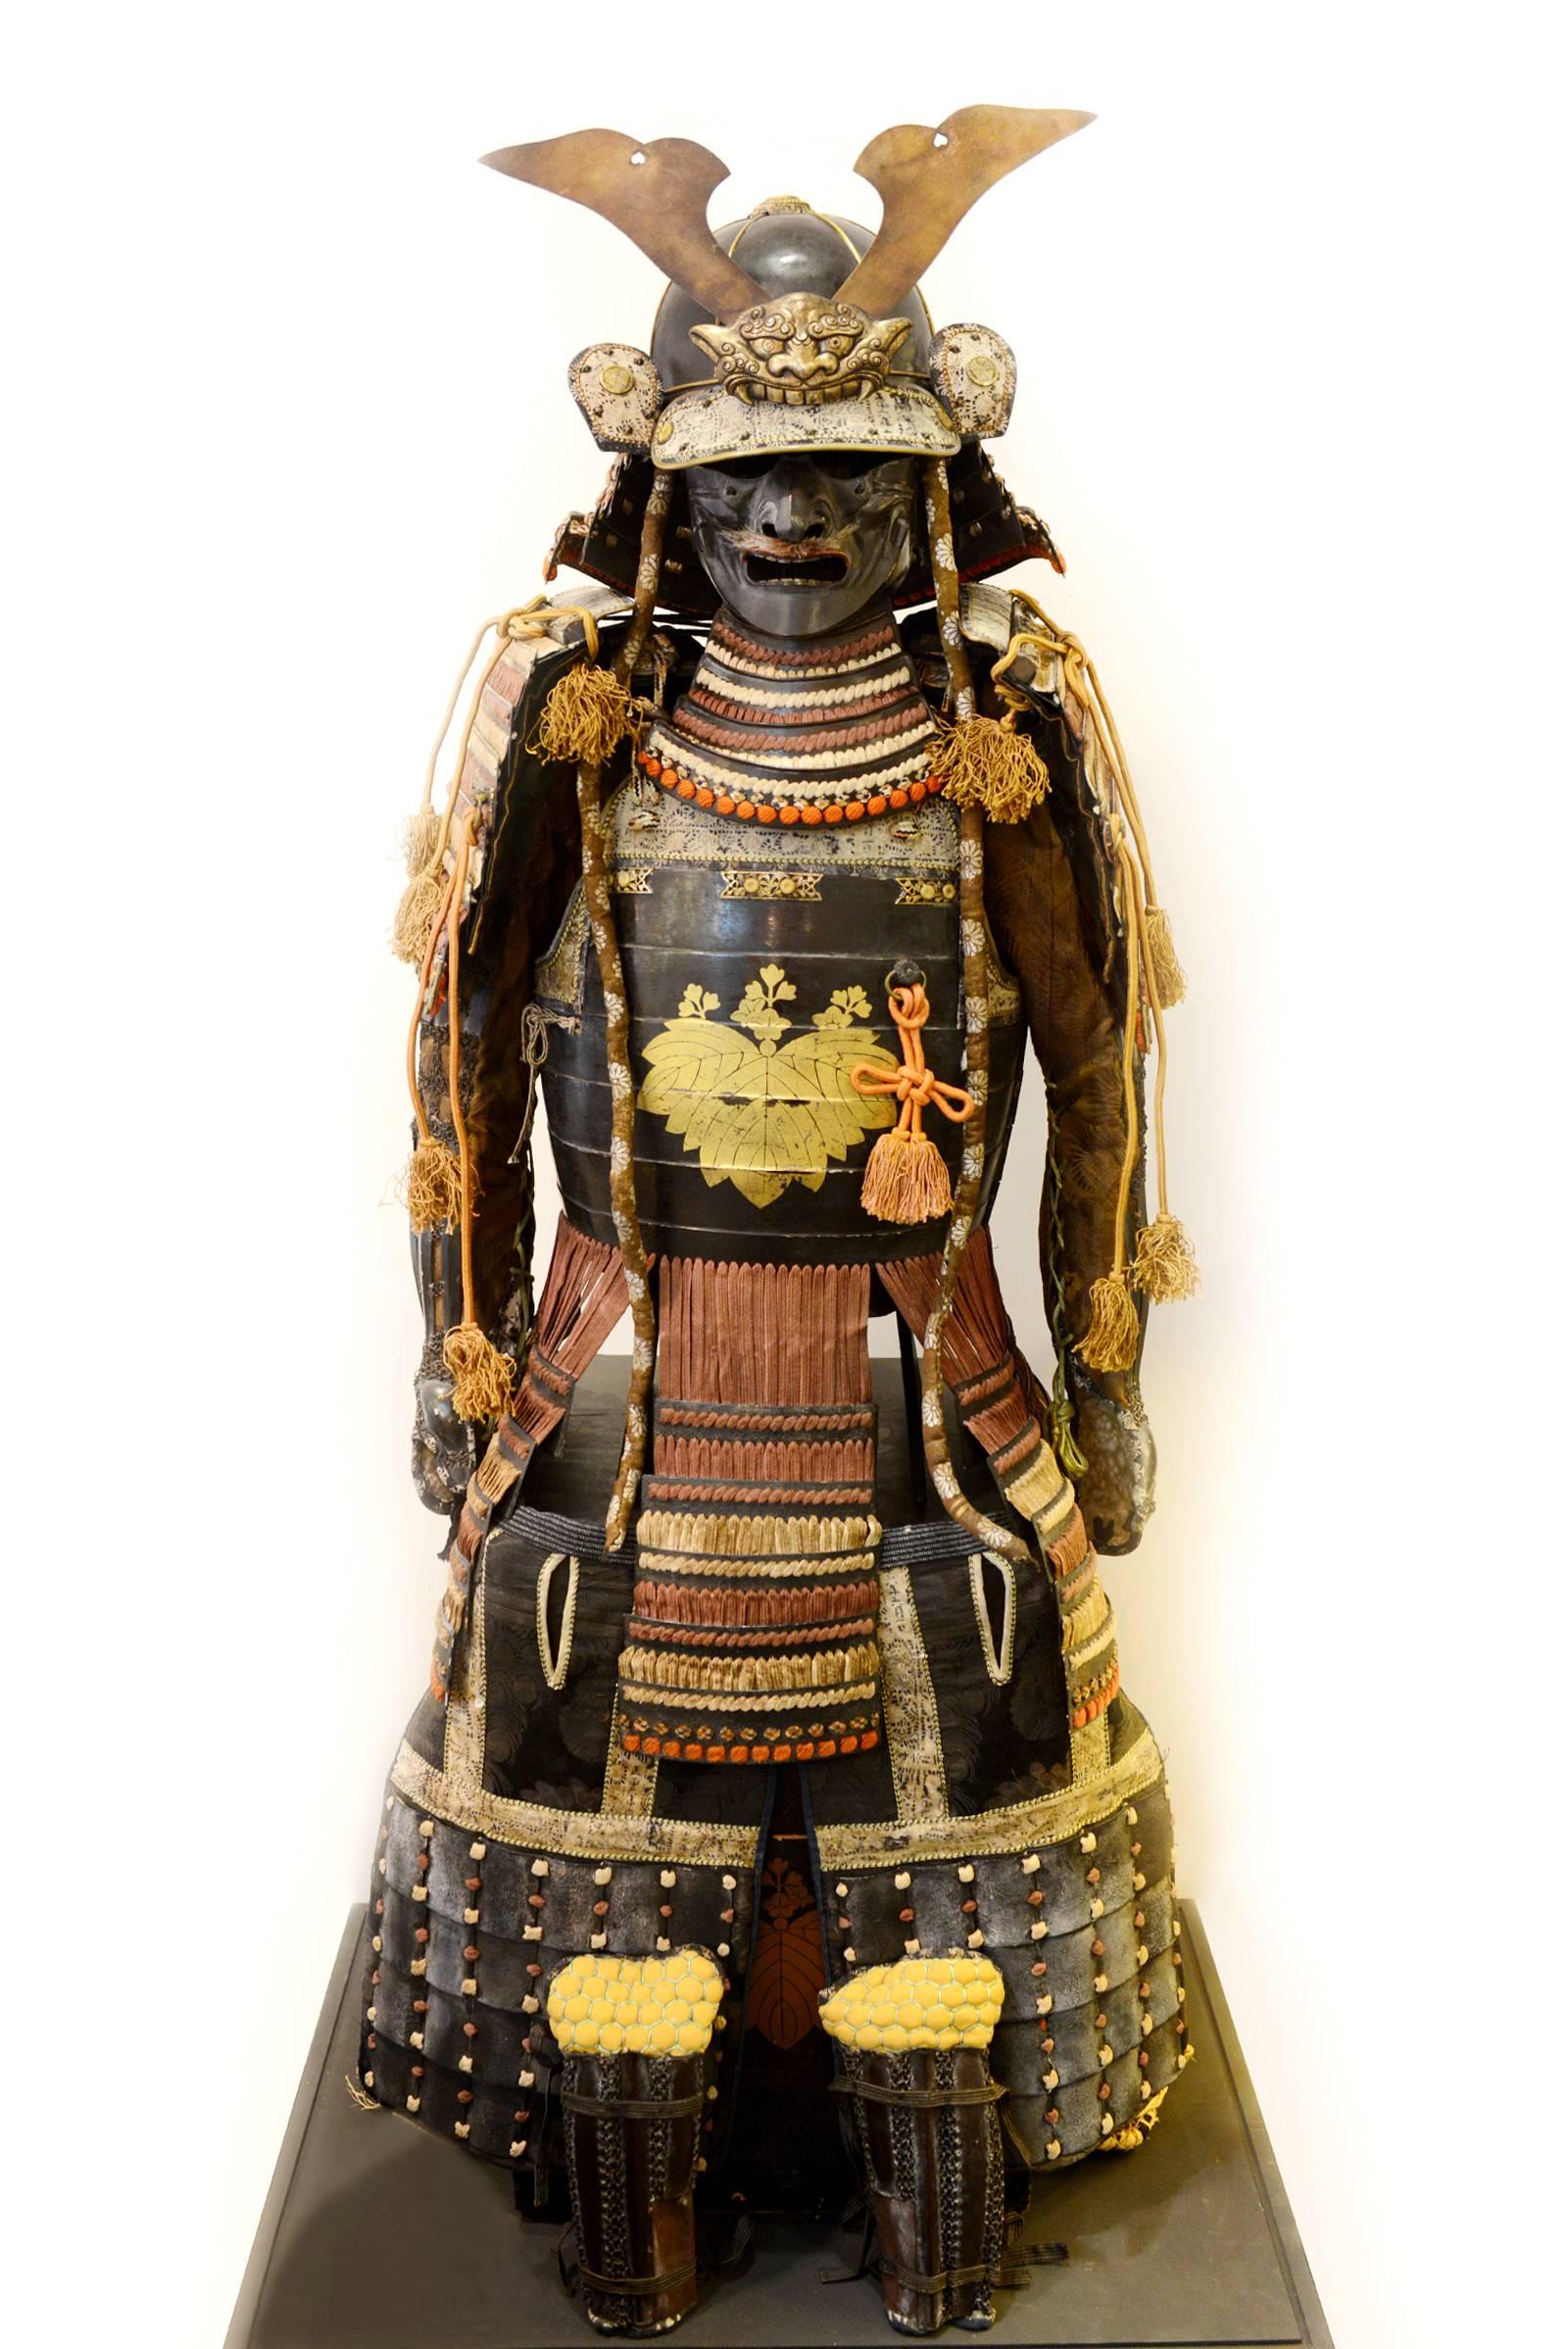 Armor Yoroï Samuraï Hoso-Kawa family from Kuma-Moto,
on Kyushu island. Meiji Era 1868-1912. Armor from
1880. With pointed leaves and paulownia or kiri leaves.
Under glass box with Led lighting. Exceptional piece. 
Led box: L 80 x D 60 x H